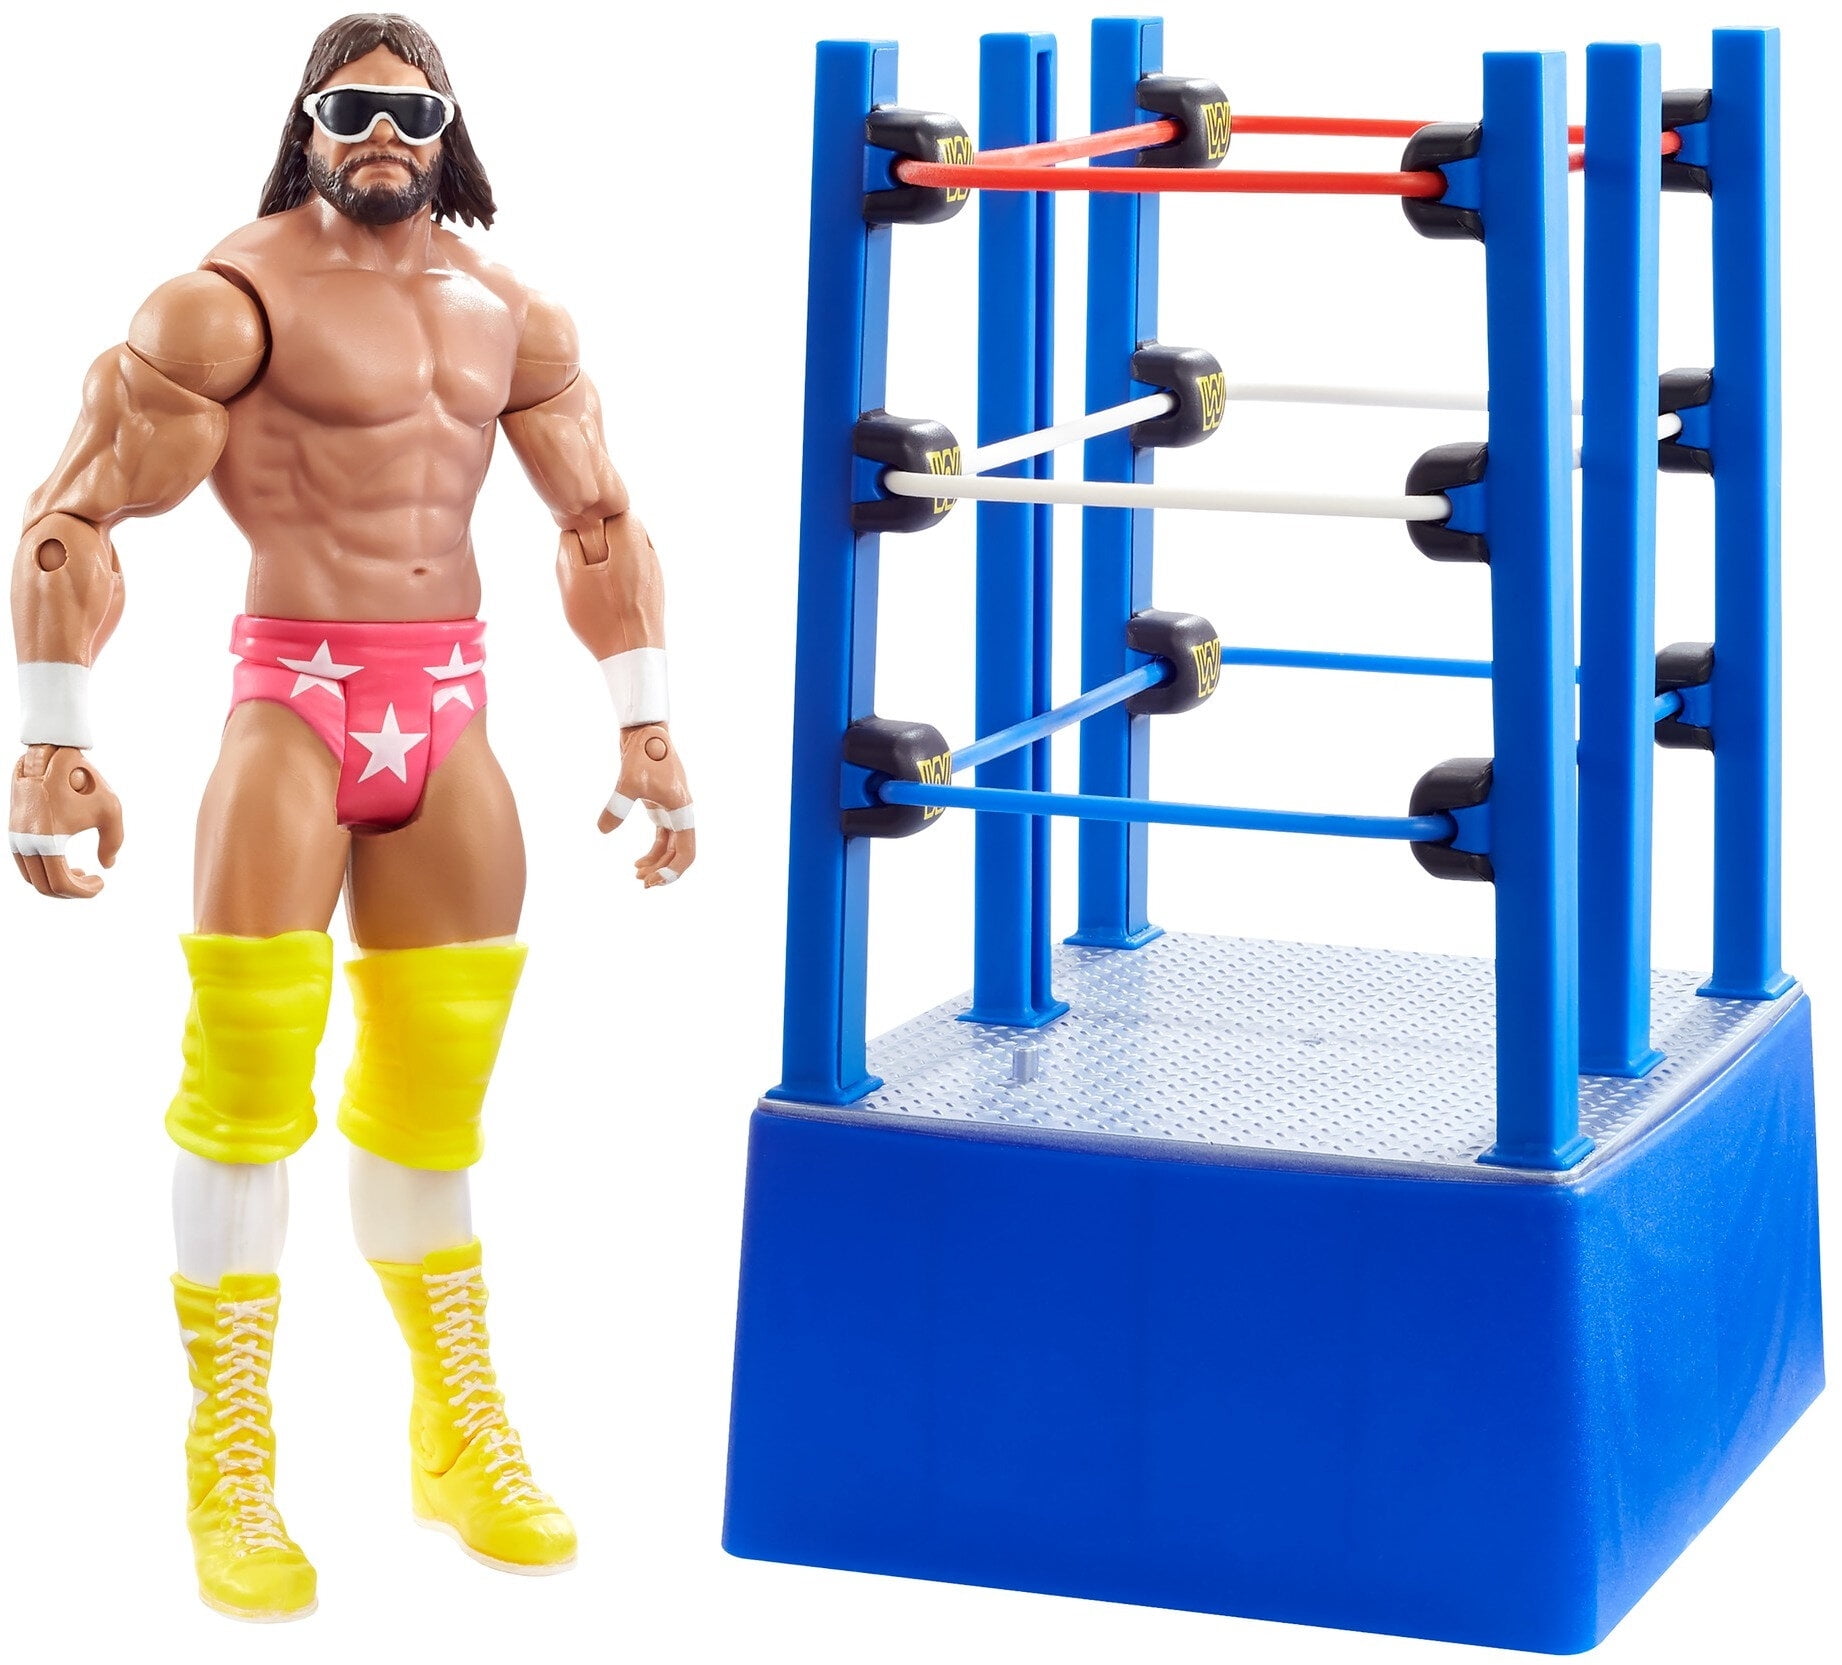 WWF WWE WrestleMania 12 MINI Action Figurines With Ring Fence Gym Kids Boys Toy 